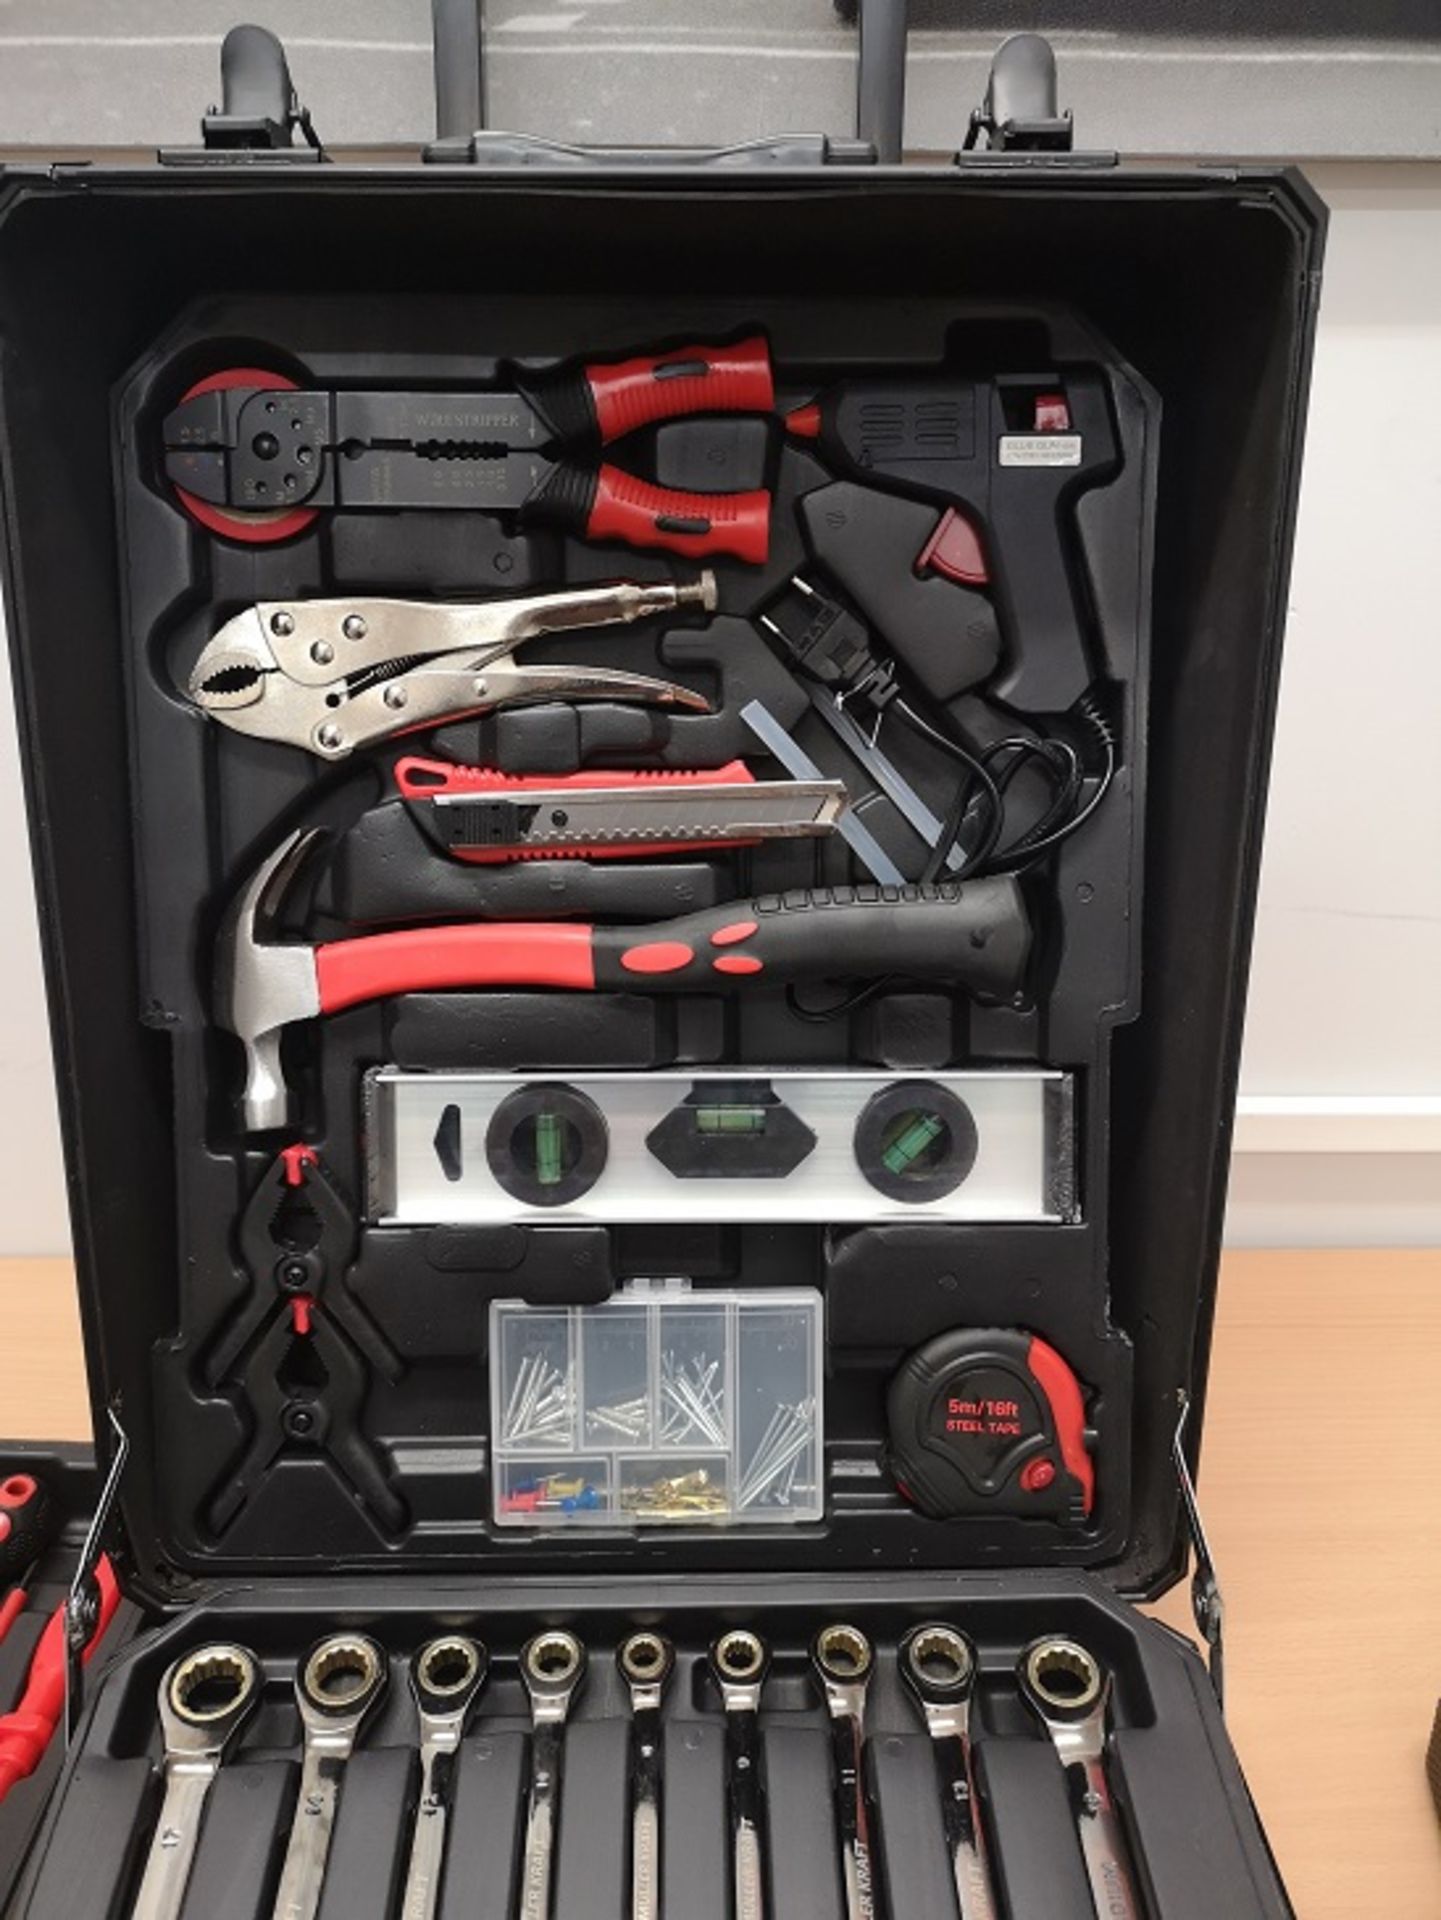 V Brand New 186pc (Minimum) Tool Kit In Wheeled Carry Case Includes Rachet Spanners - RRP £199.99 - Image 6 of 8